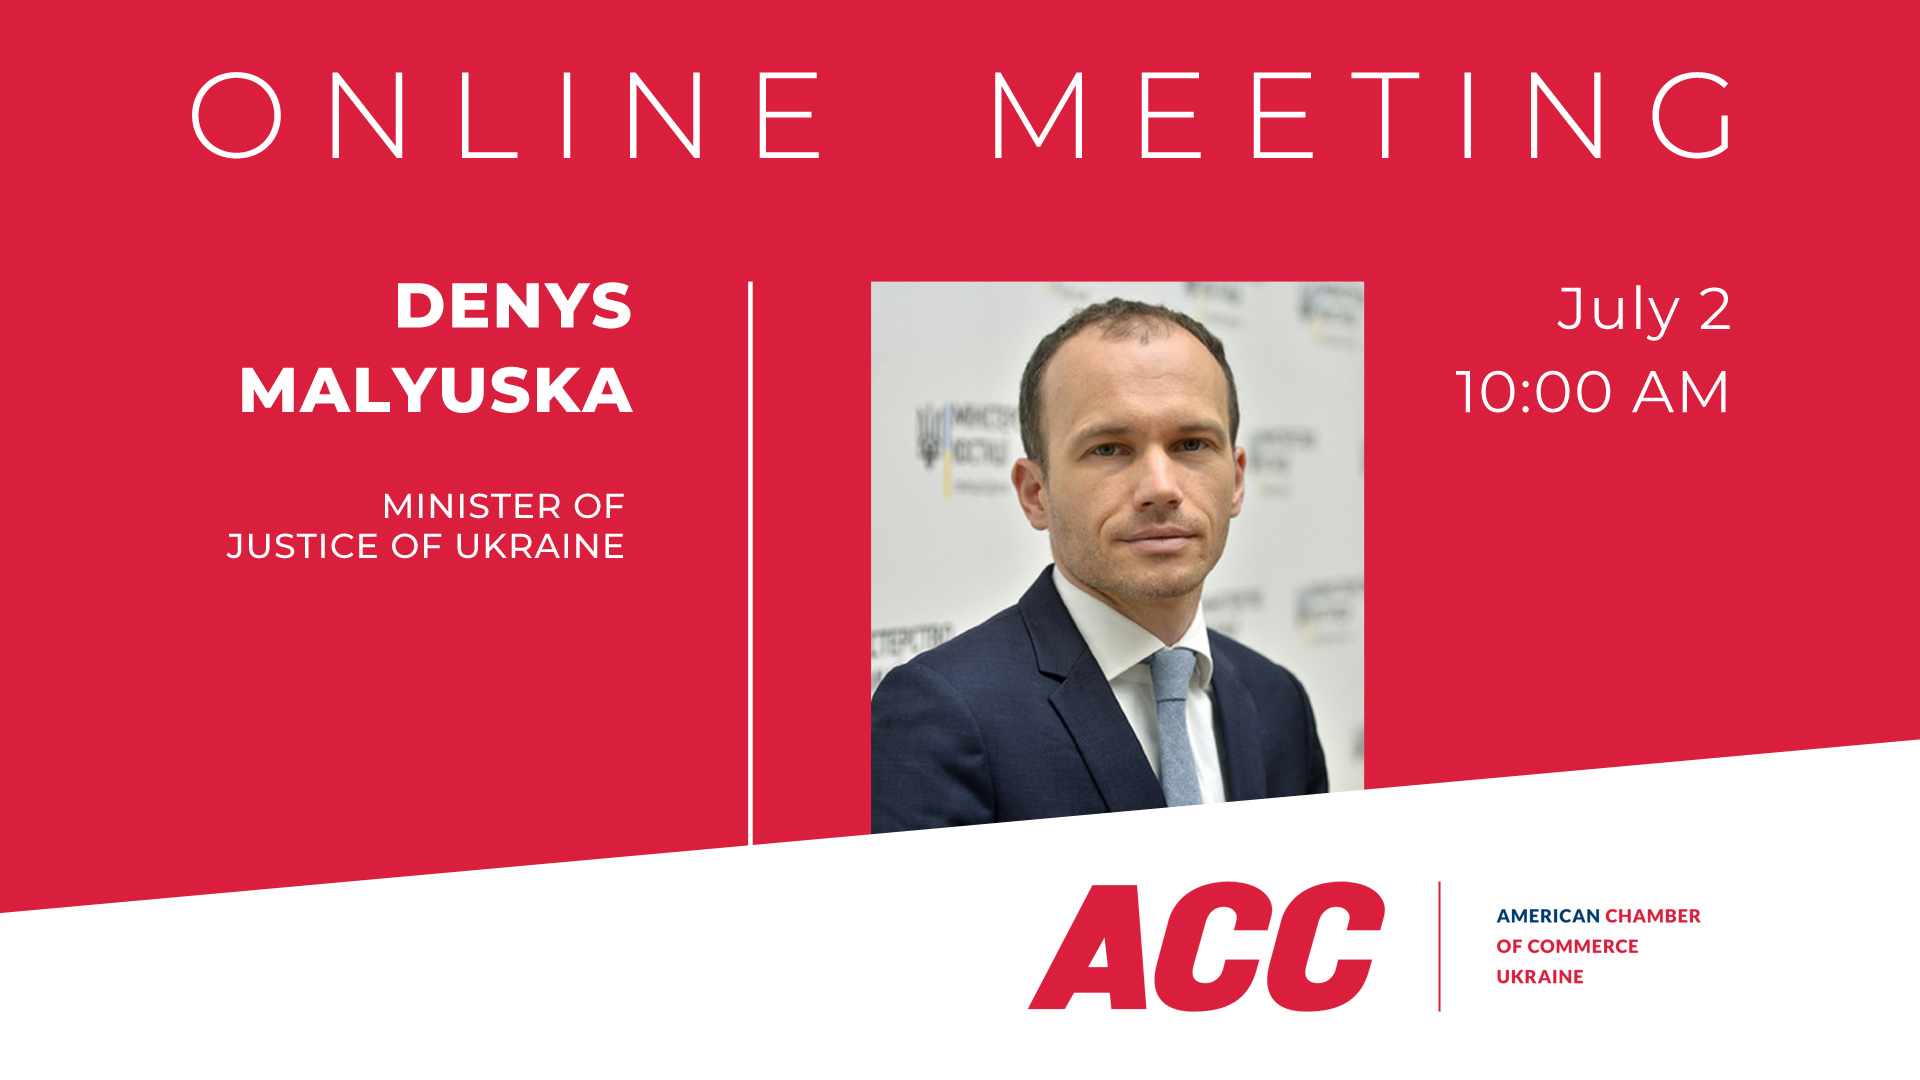 Online Meeting with Denys Malyuska, Minister of Justice of Ukraine